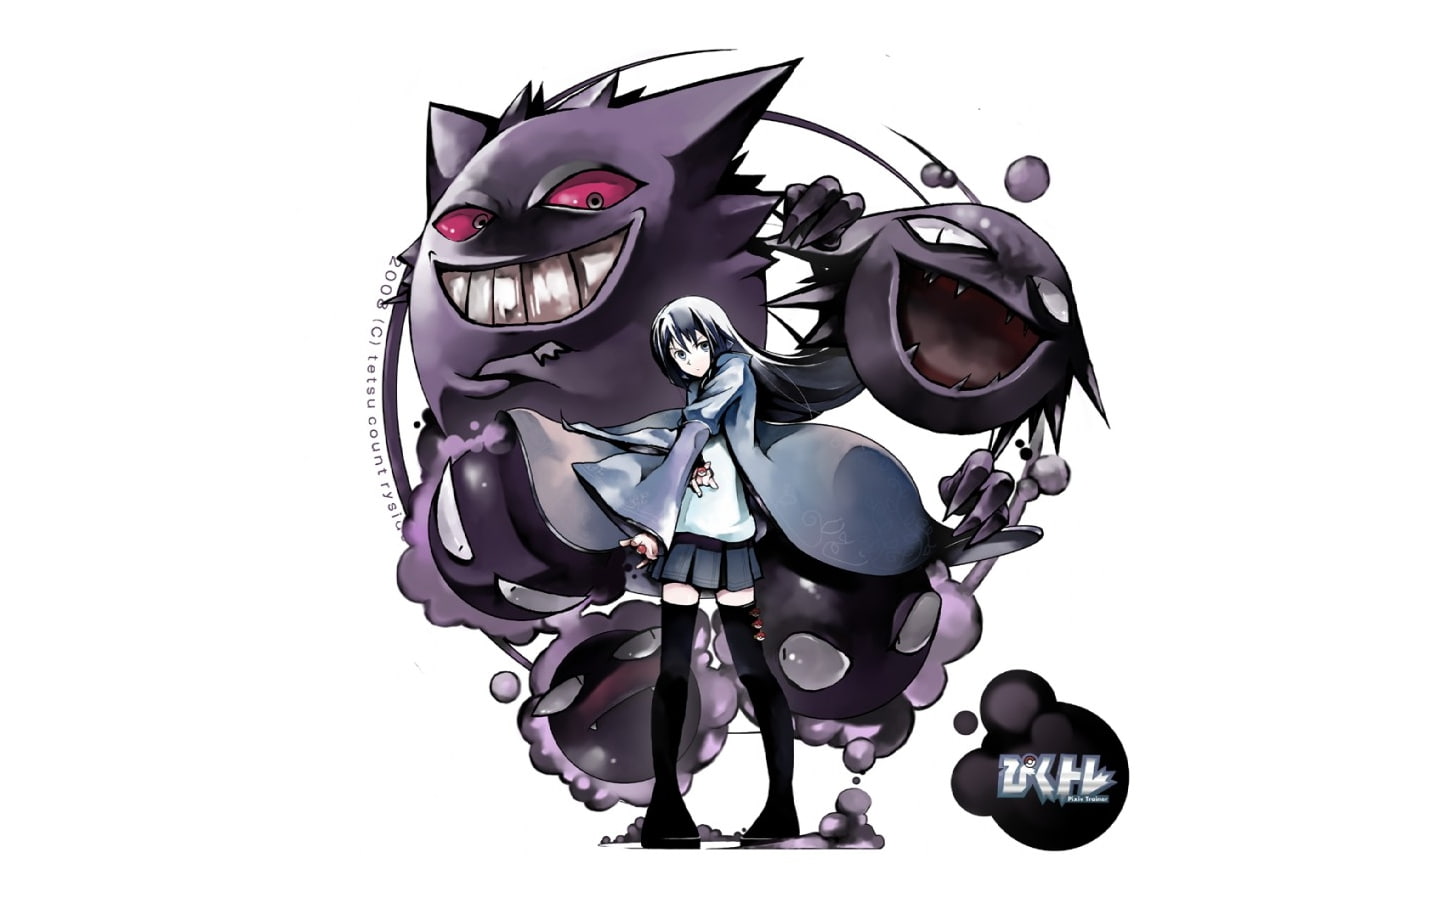 Pokemon Trainer With A Gengar - HD Wallpaper 